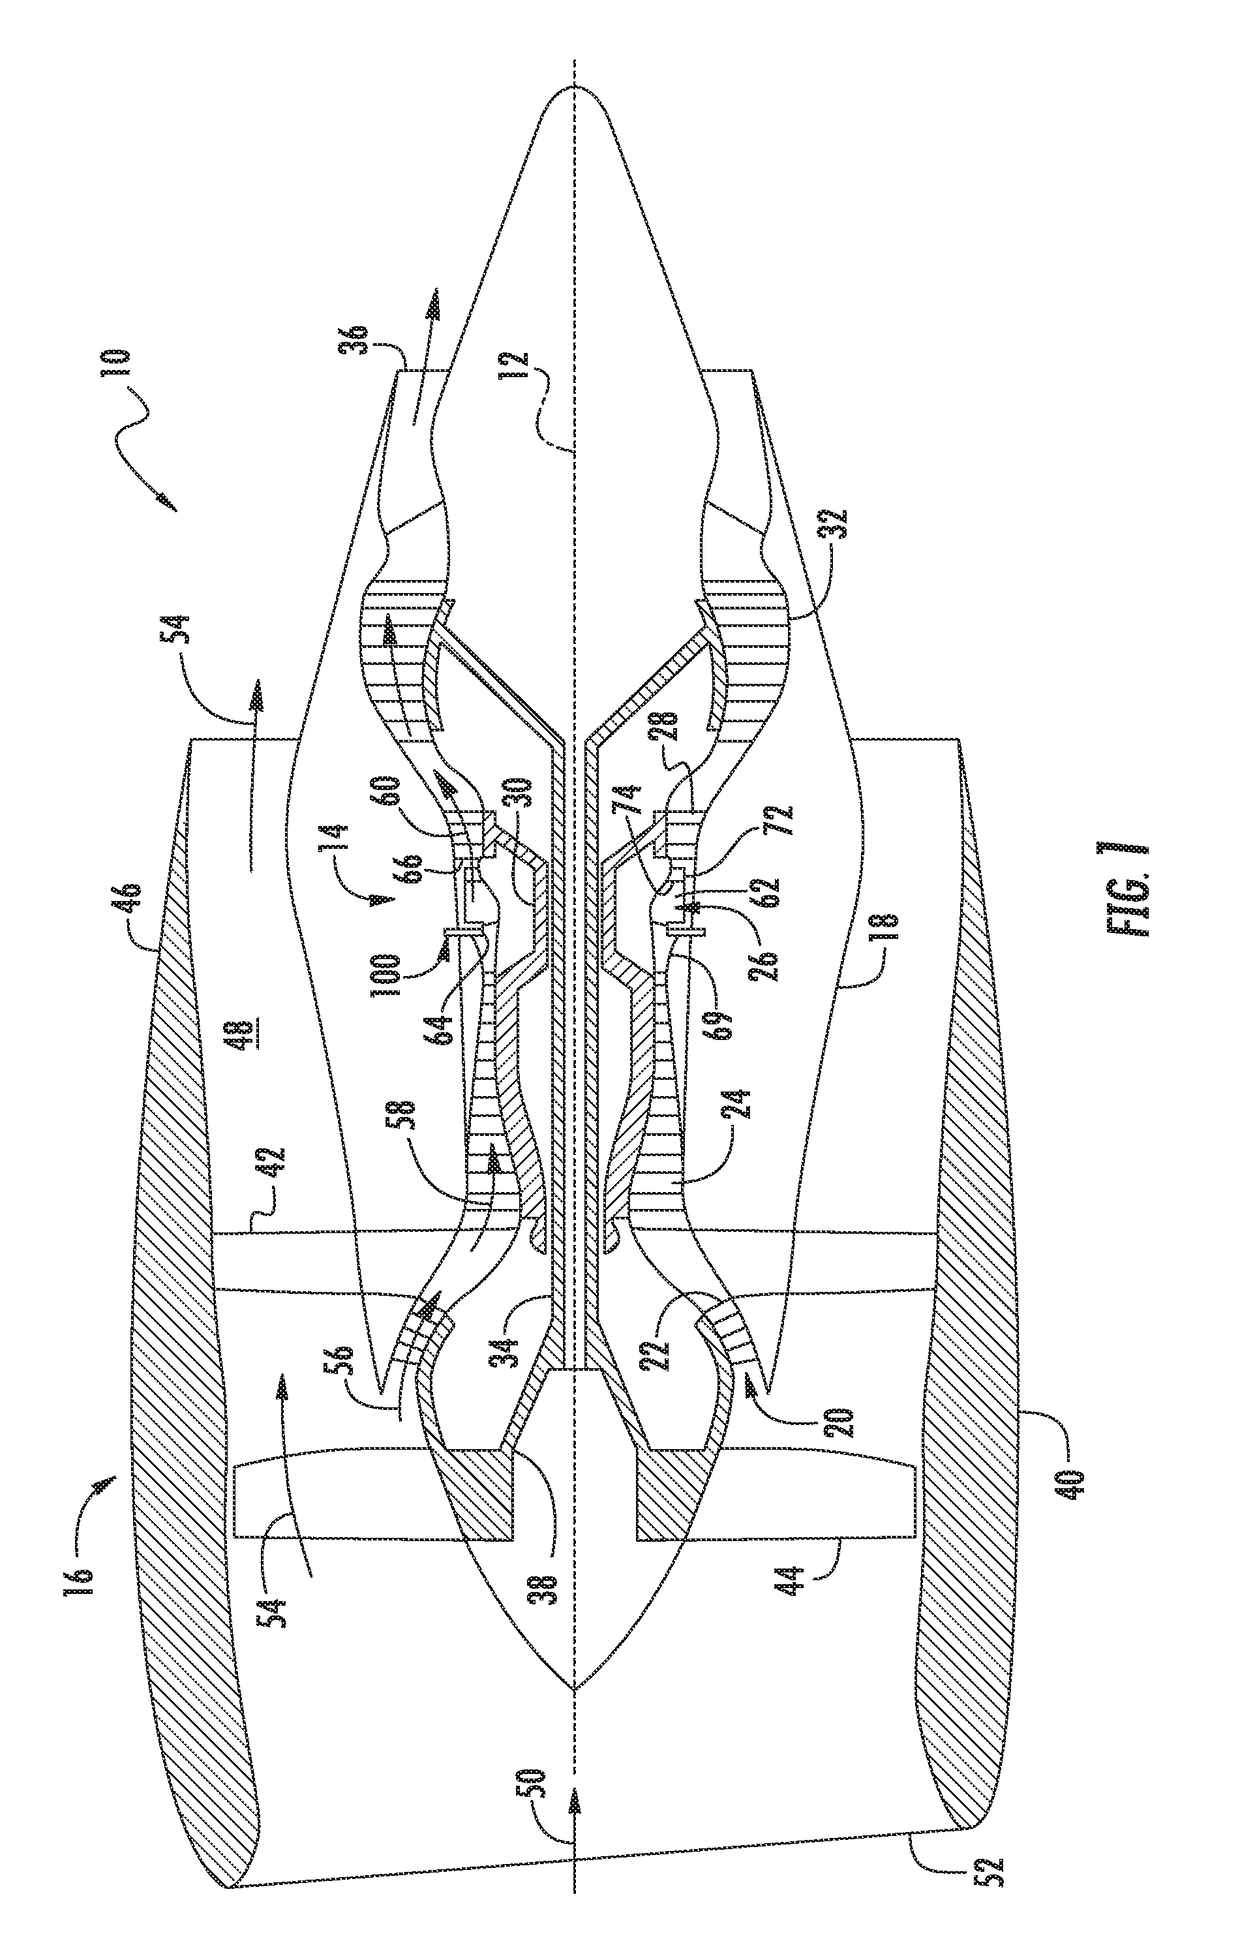 Torsional Damping for Gas Turbine Engines